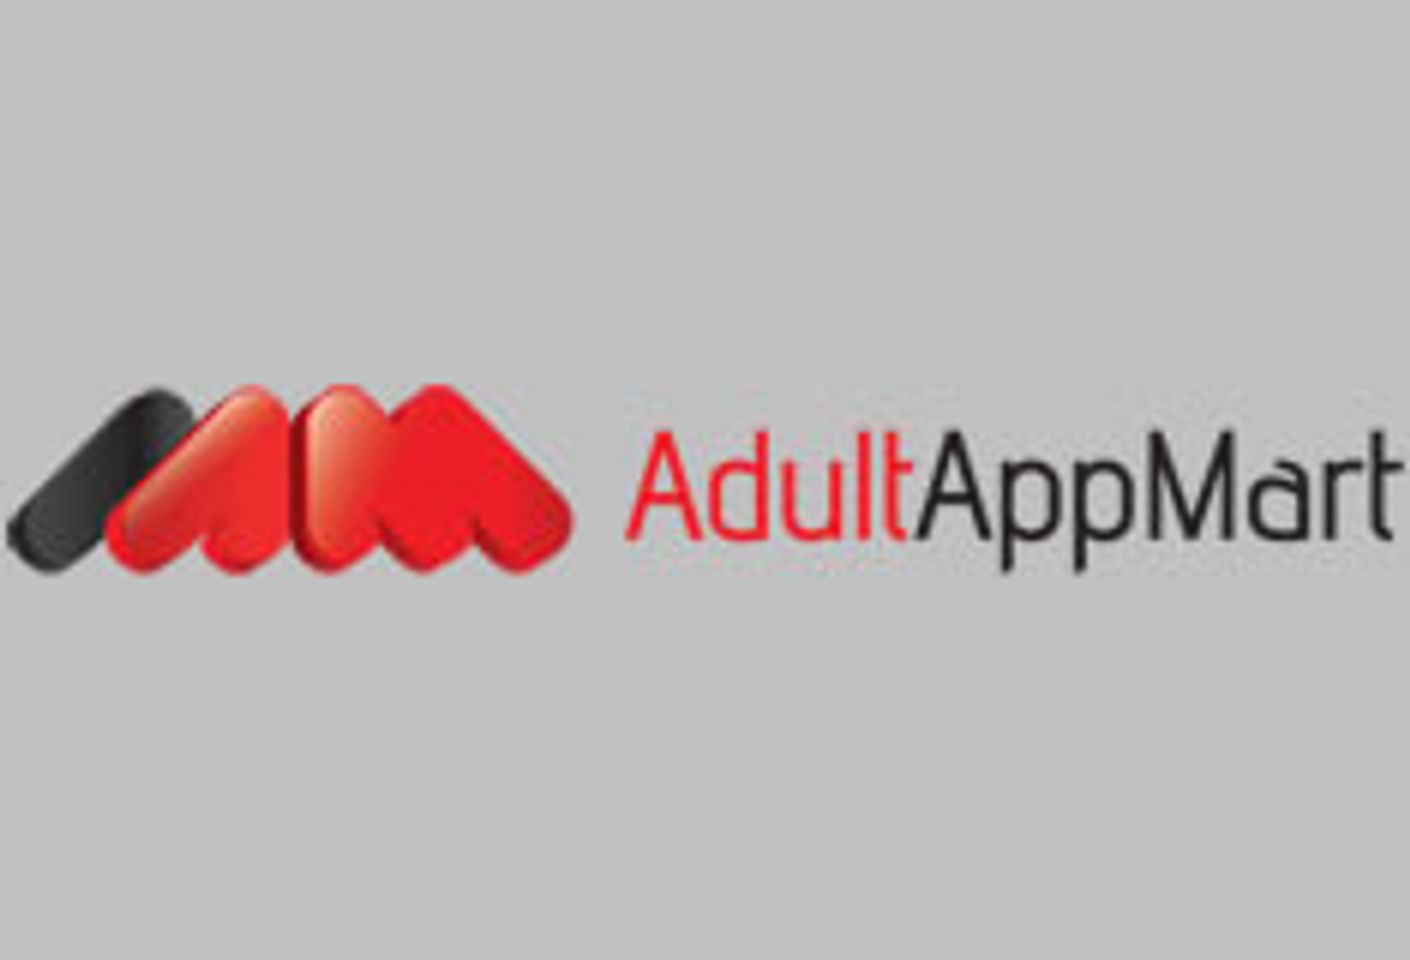 AdultAppMart Now Compatible with Gaming System Ouya